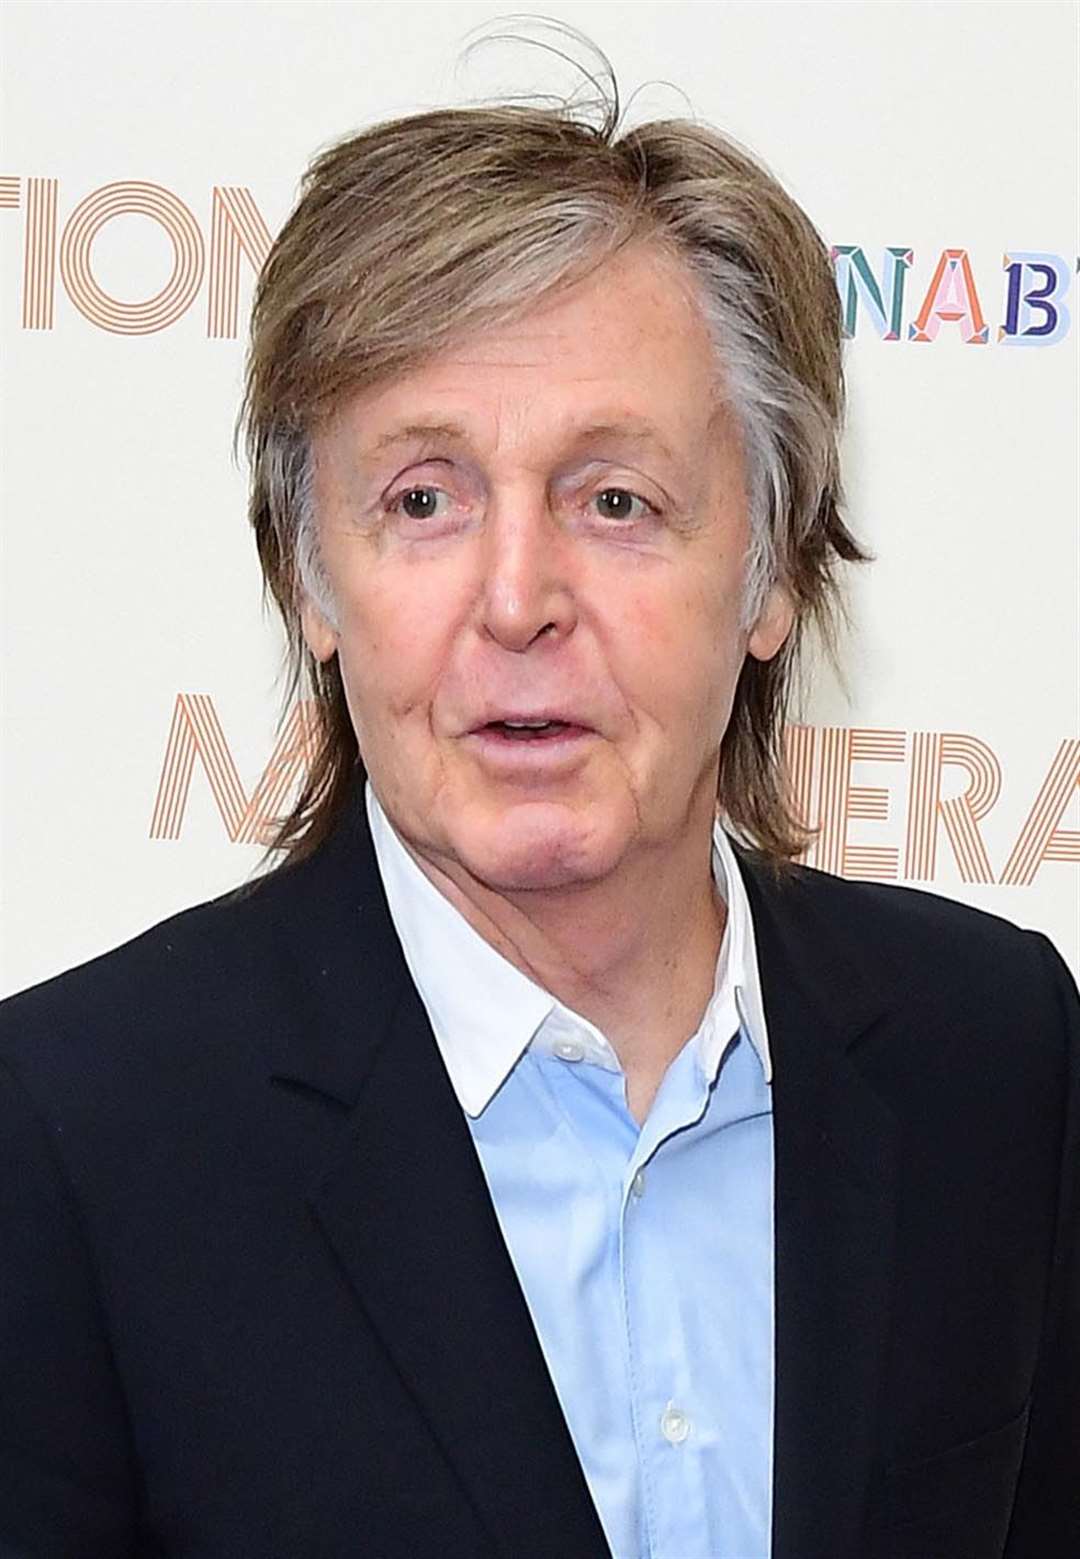 Sir Paul McCartney spoke of his appreciation of the Queen (PA)